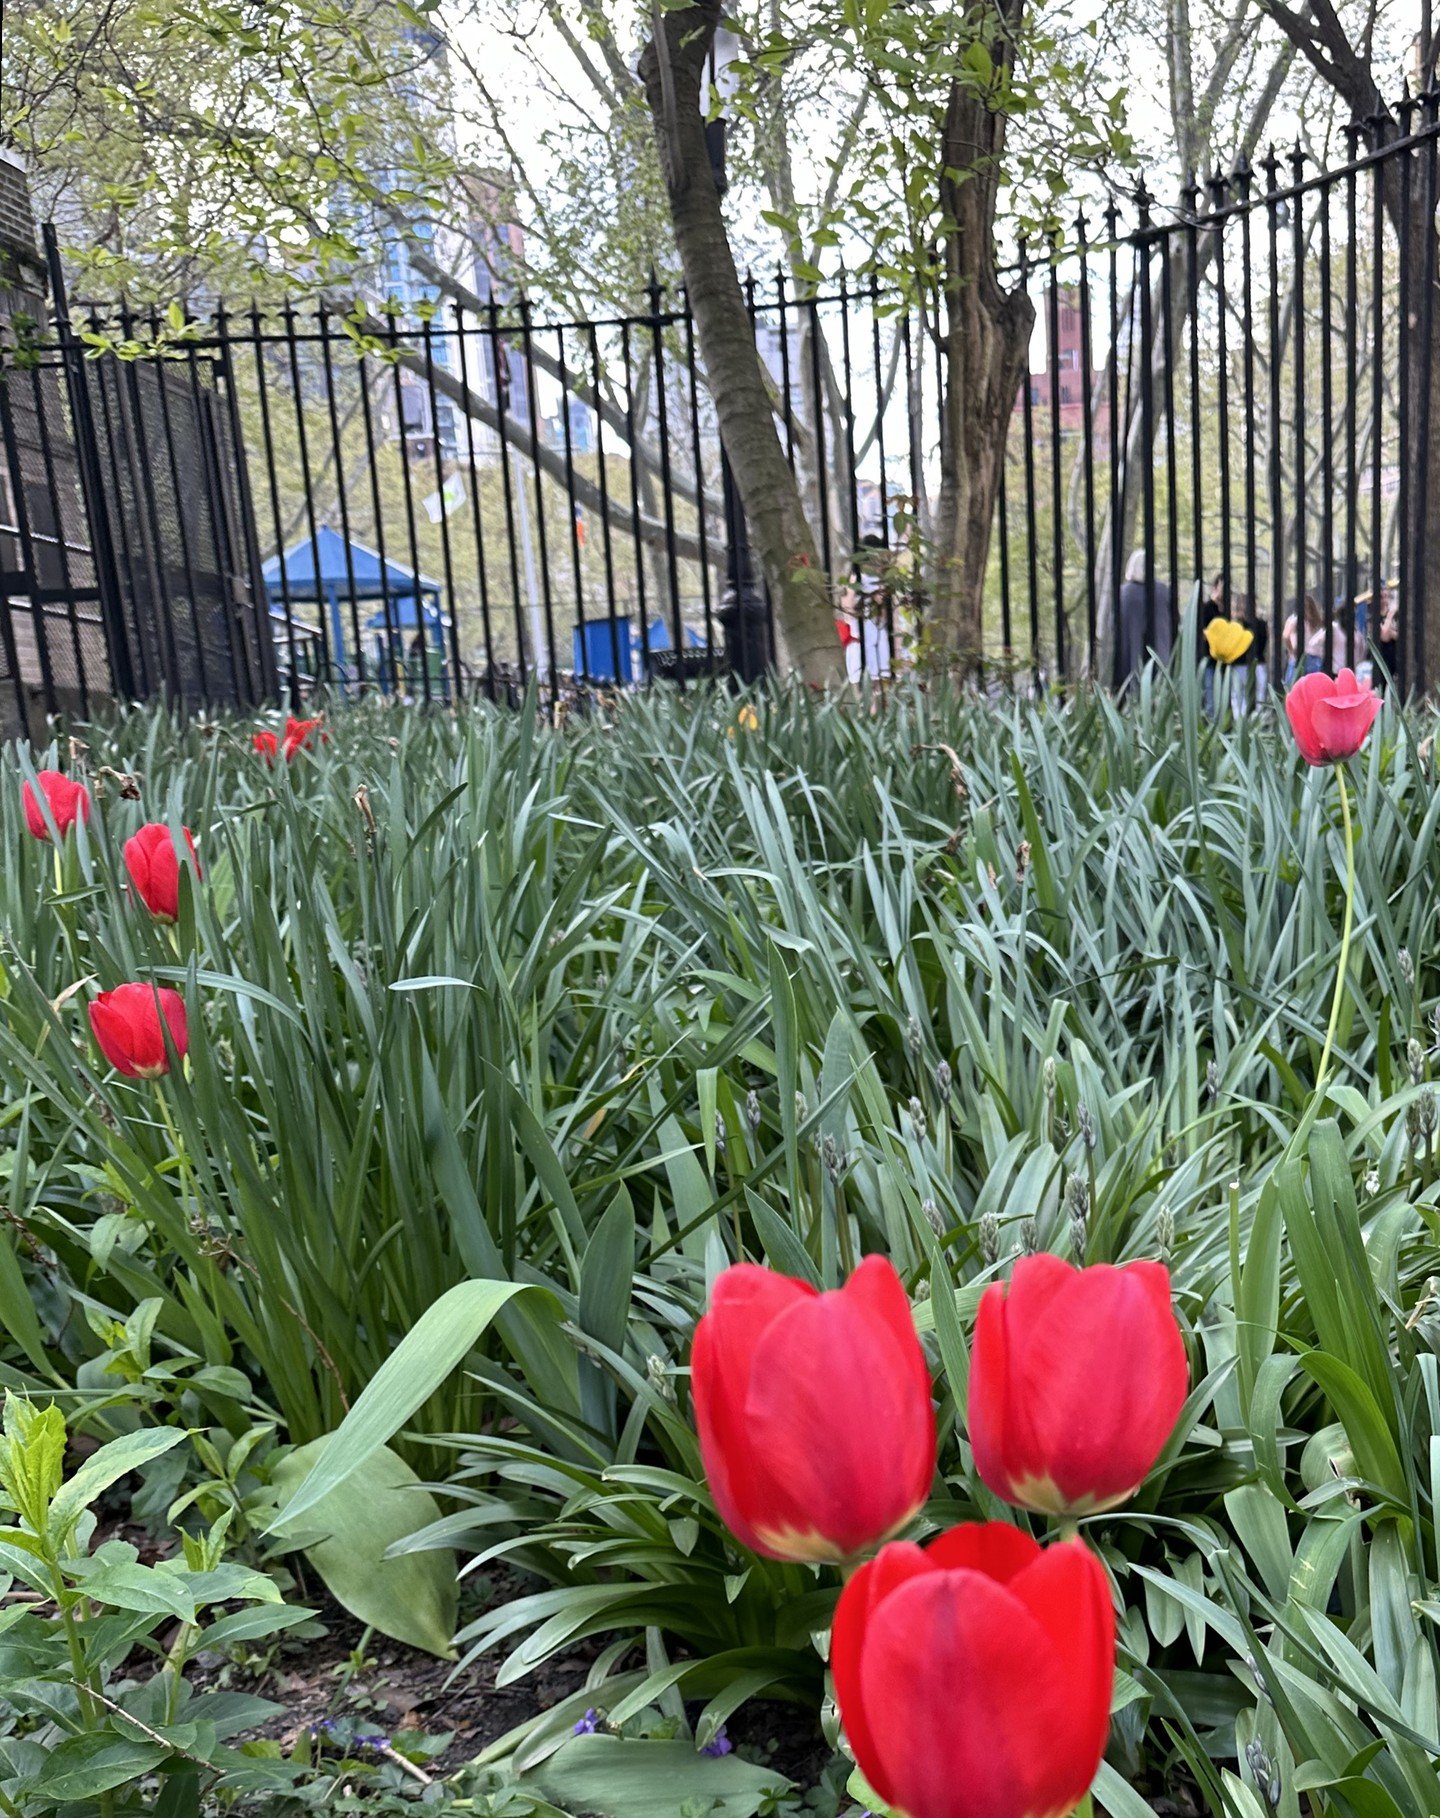 More tulips are rising in the public St. Vartan Park garden (pictured this afternoon). To learn more about the garden and flowers in the green space, please visit the Garden and Flowers pages of the St. Vartan Park Conservancy website (link in bio).